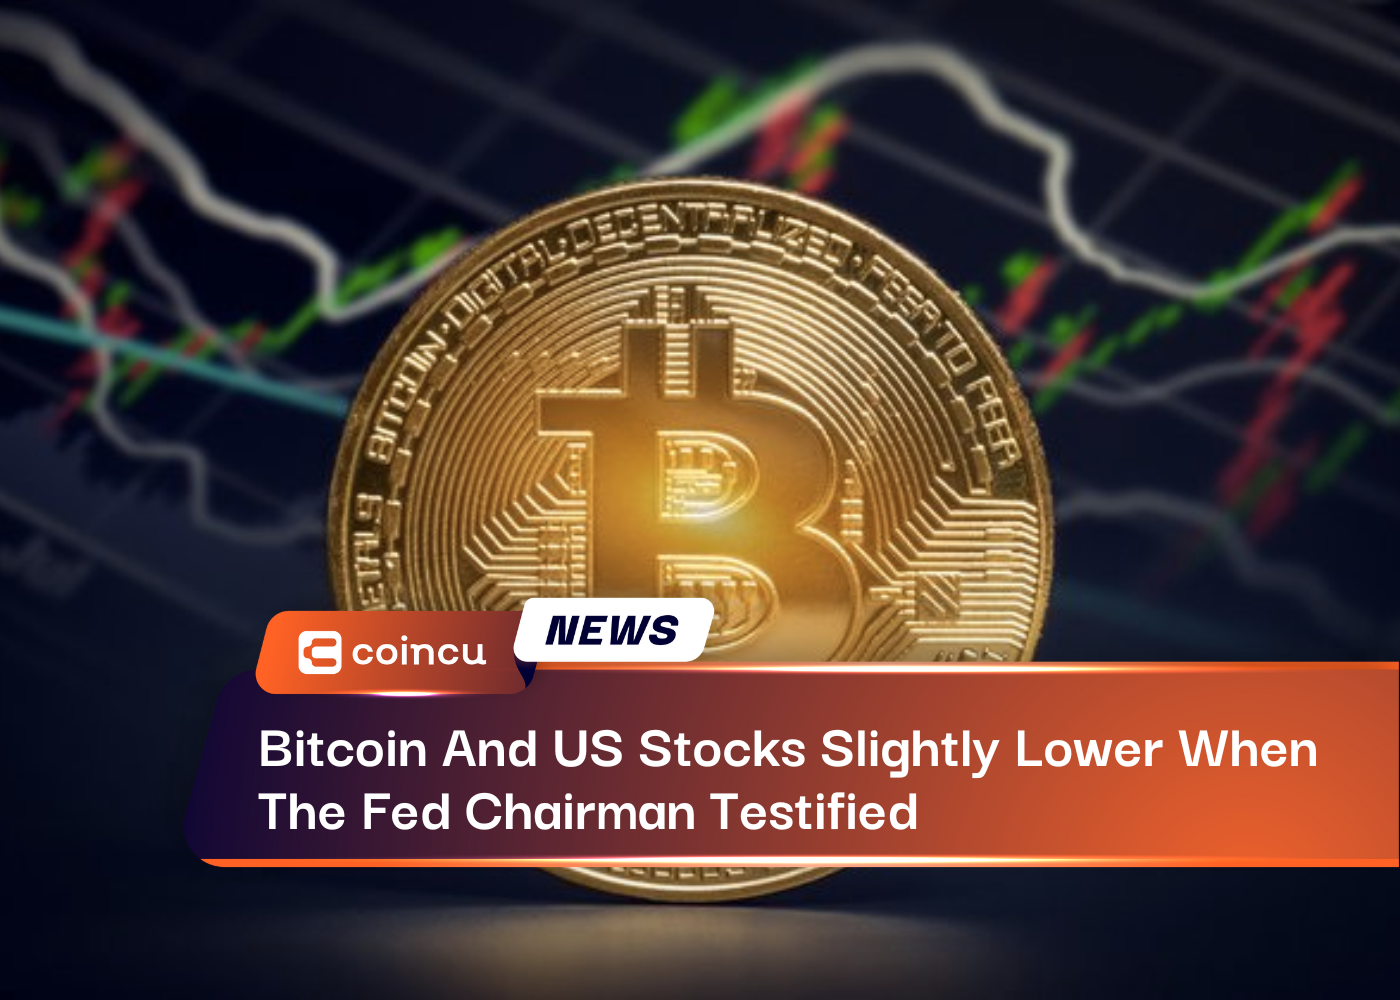 Bitcoin And US Stocks Slightly Lower When The Fed Chairman Testified